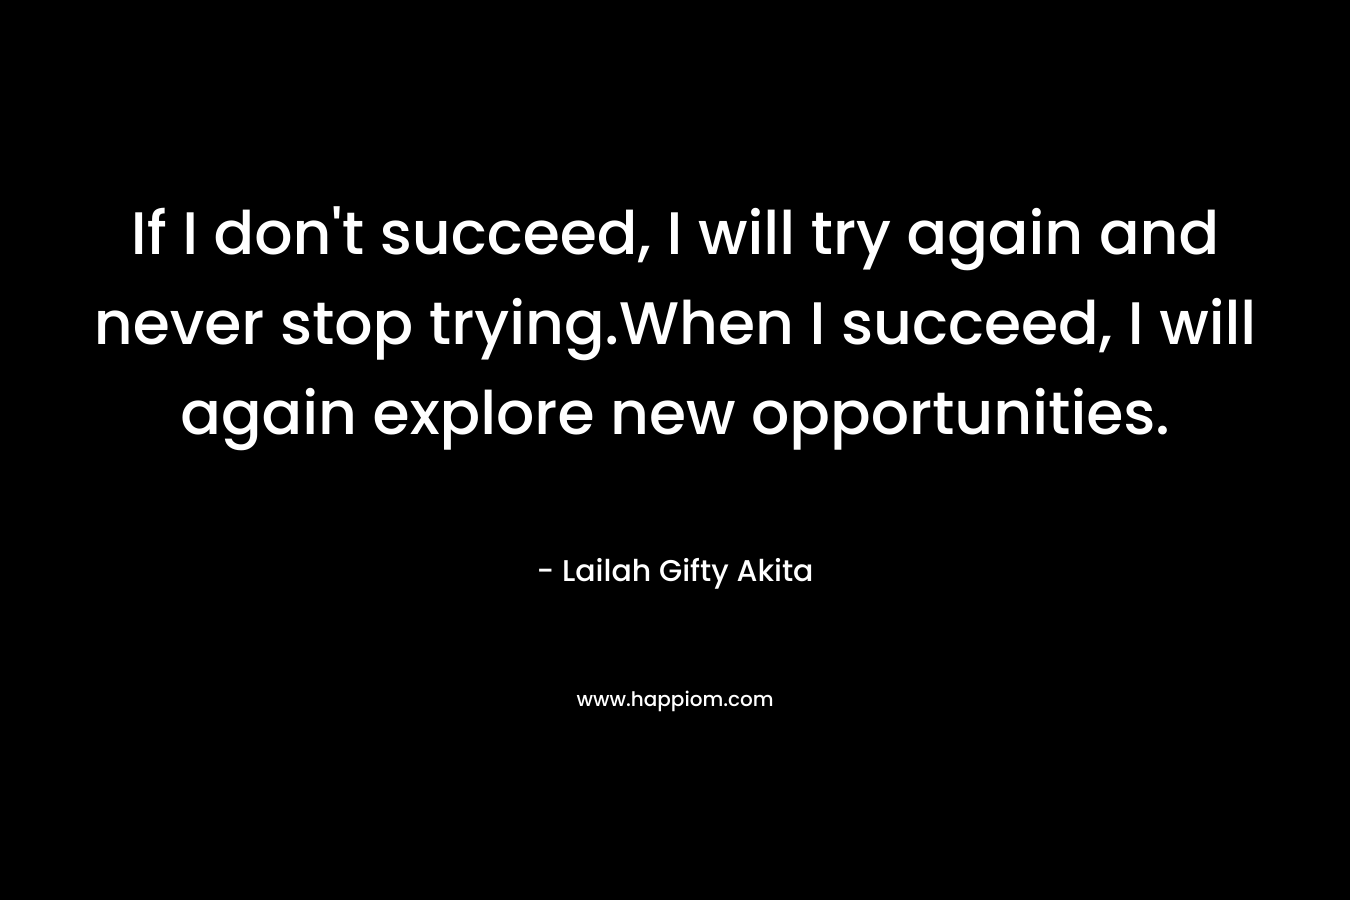 If I don't succeed, I will try again and never stop trying.When I succeed, I will again explore new opportunities.